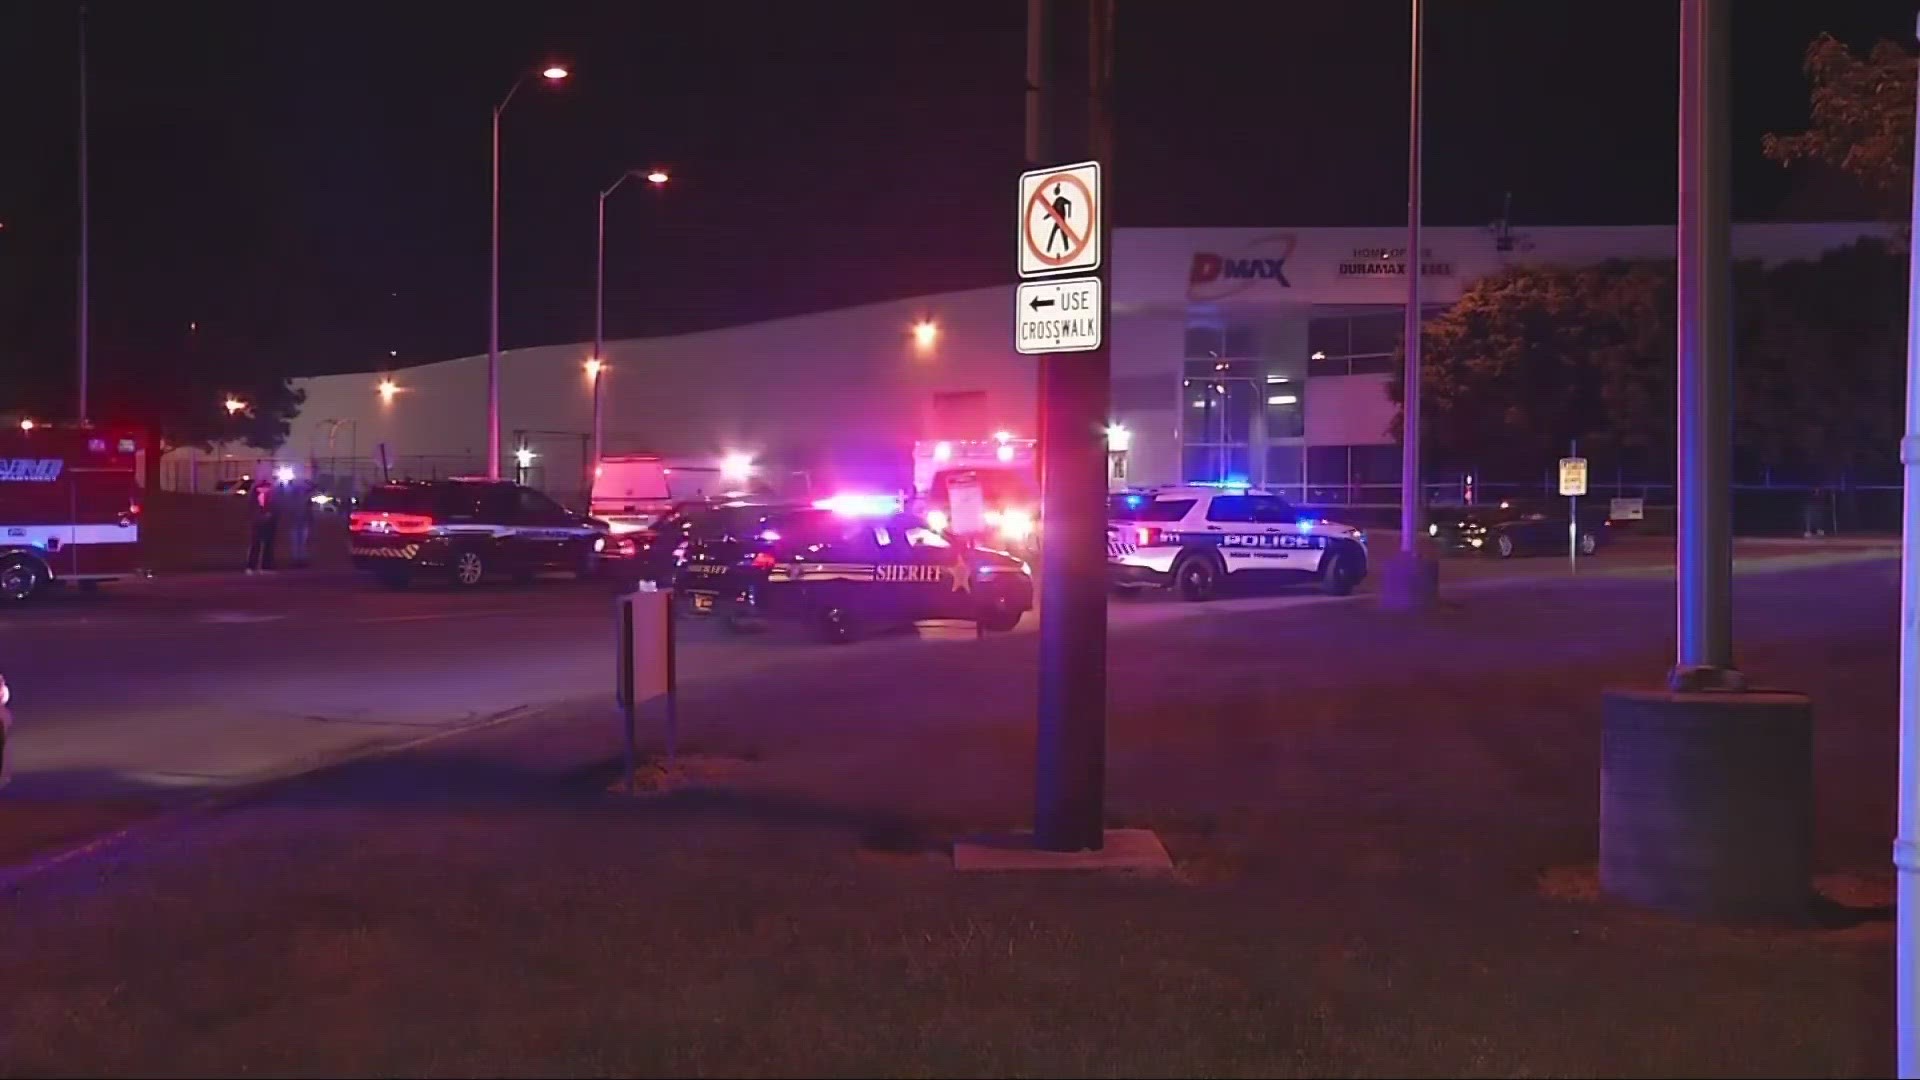 Police say the suspect allegedly entered the plant just before 9 p.m., and they believe he targeted the victim who died from their injuries.